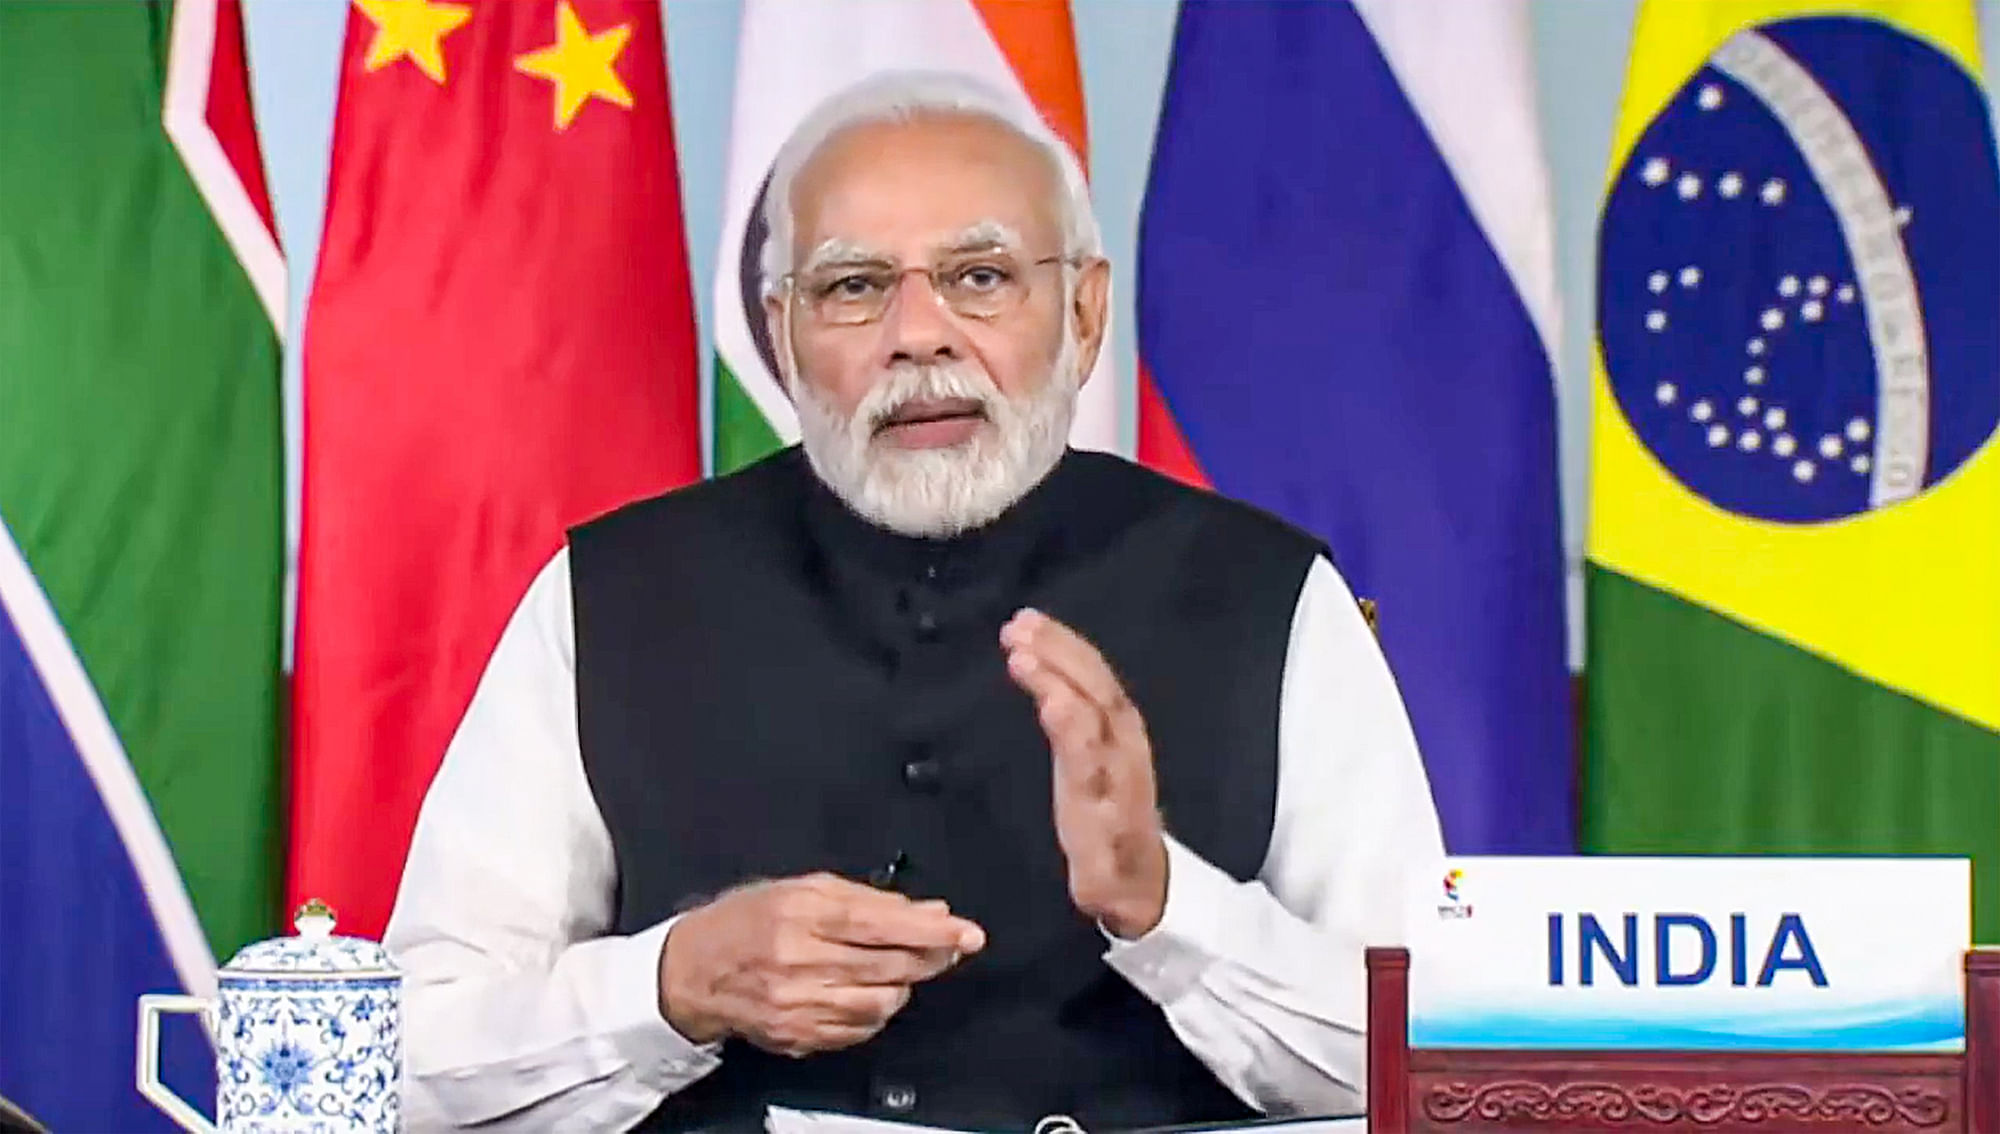 <div class="paragraphs"><p>Prime Minister Narendra Modi on Friday, 24 June, said that the BRICS member nations should understand each other's security concerns and provide mutual support in the designation of terrorists, asserting that this sensitive issue should not be "politicised".</p></div>